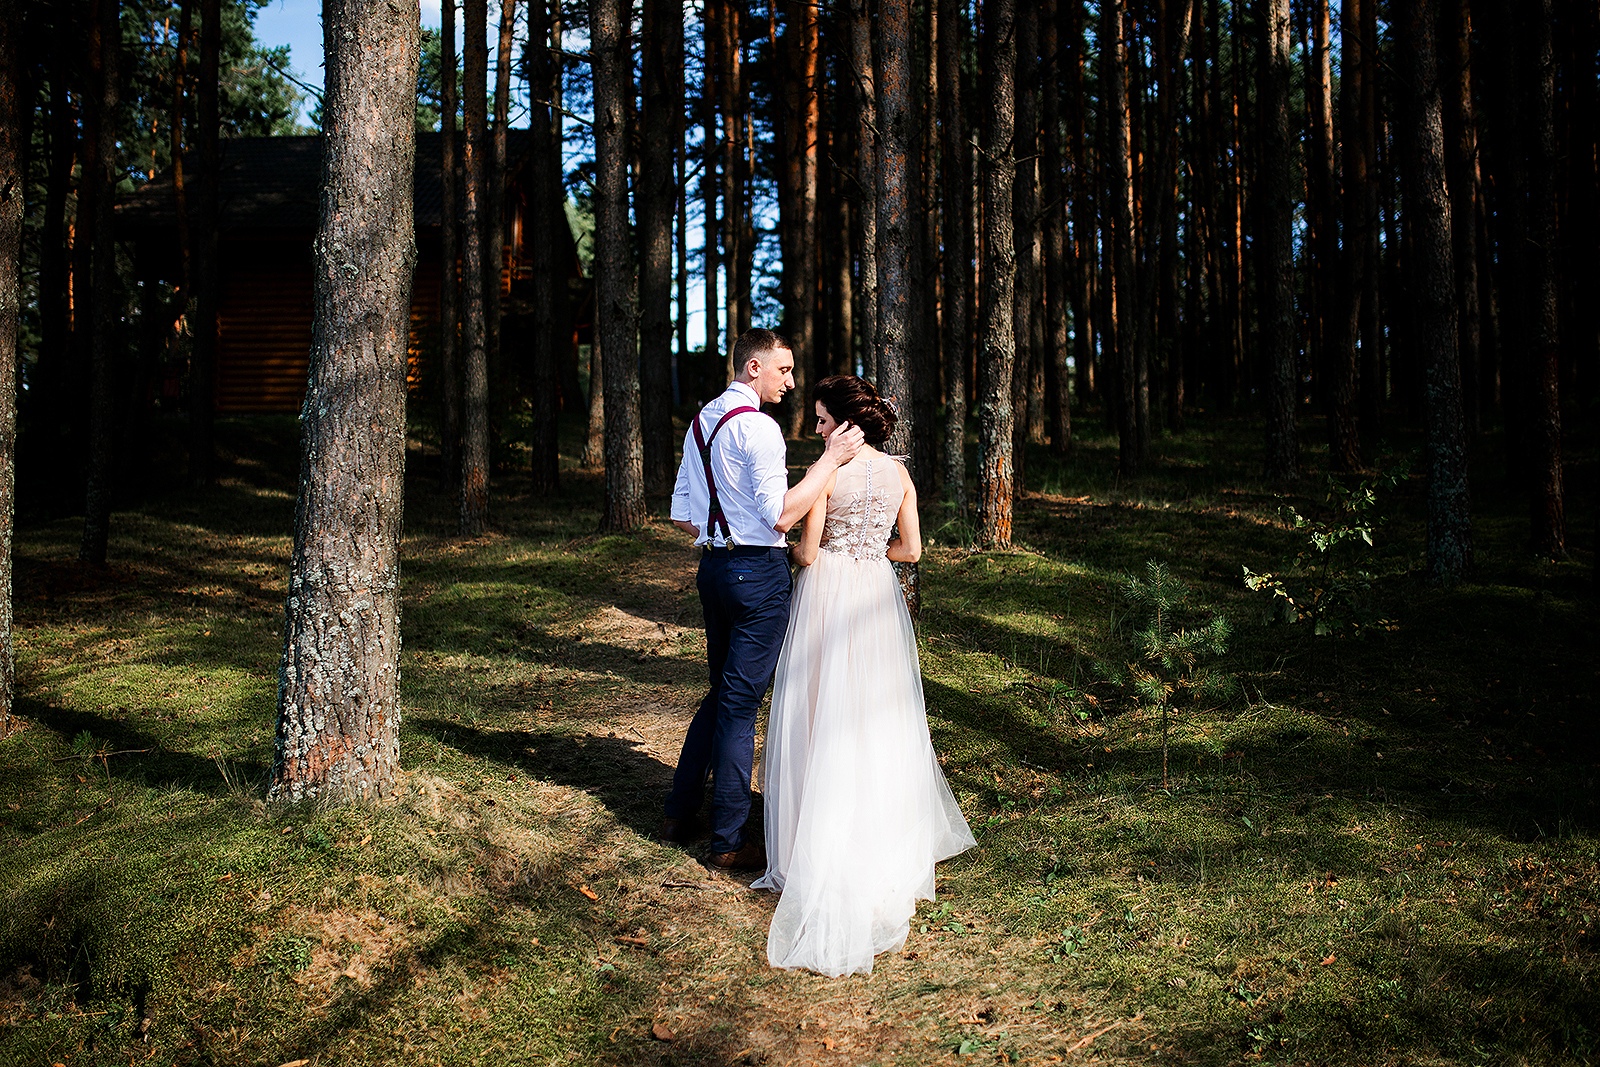 Groom and bride in the forest